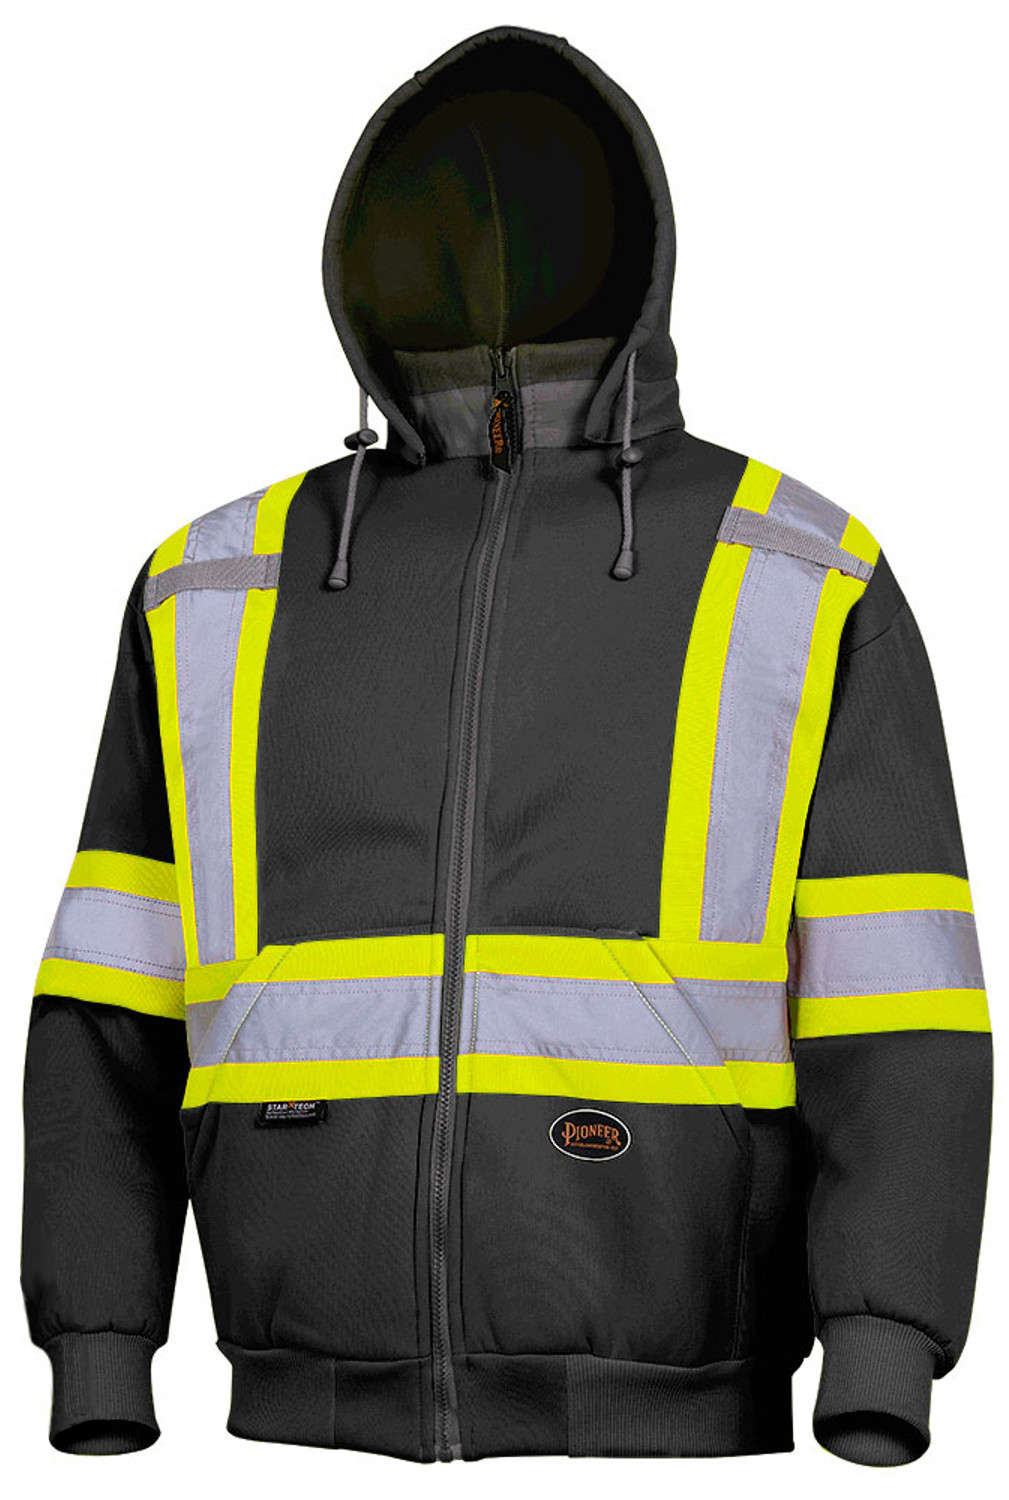 https://cdn11.bigcommerce.com/s-10f42/images/stencil/1500x1500/products/425/9834/pioneer-hoodie-safetywear.ca__54972__63166.1709833505.jpg?c=2